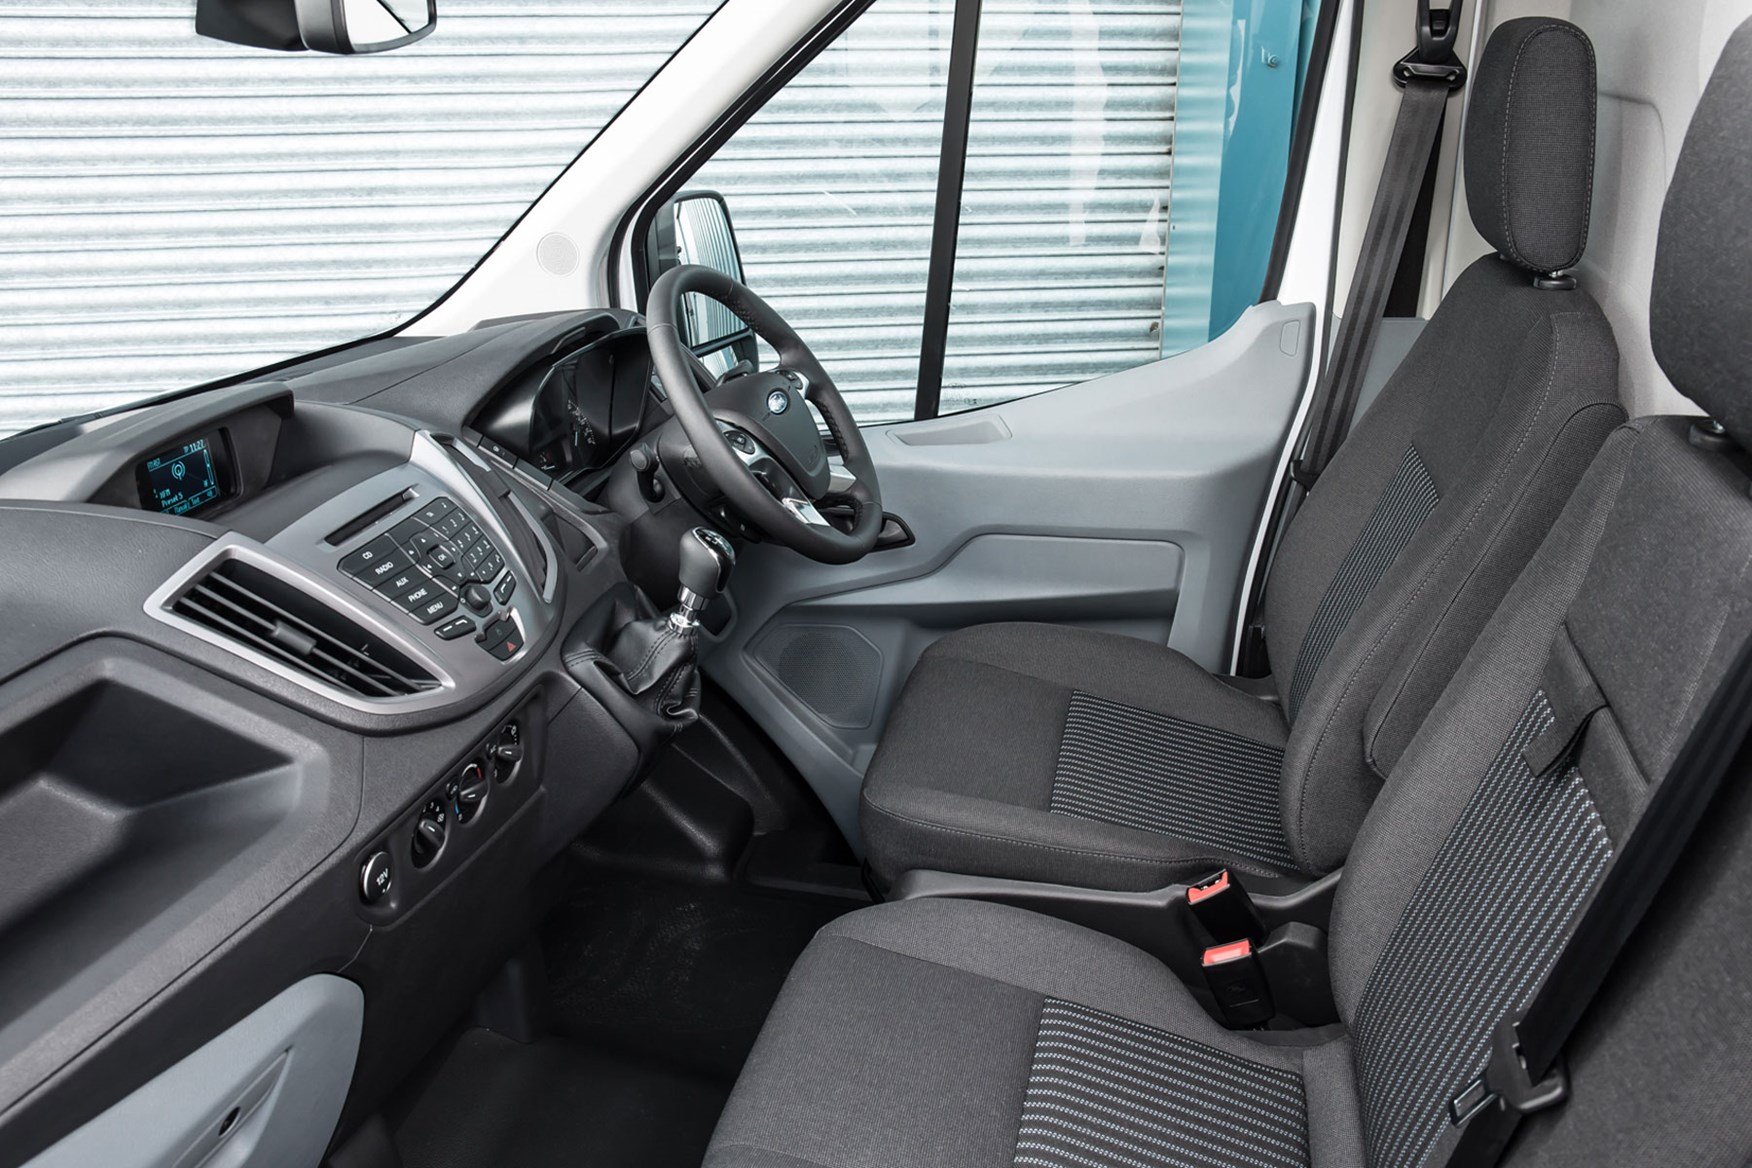 Ford Transit RWD Trend review - cab interior